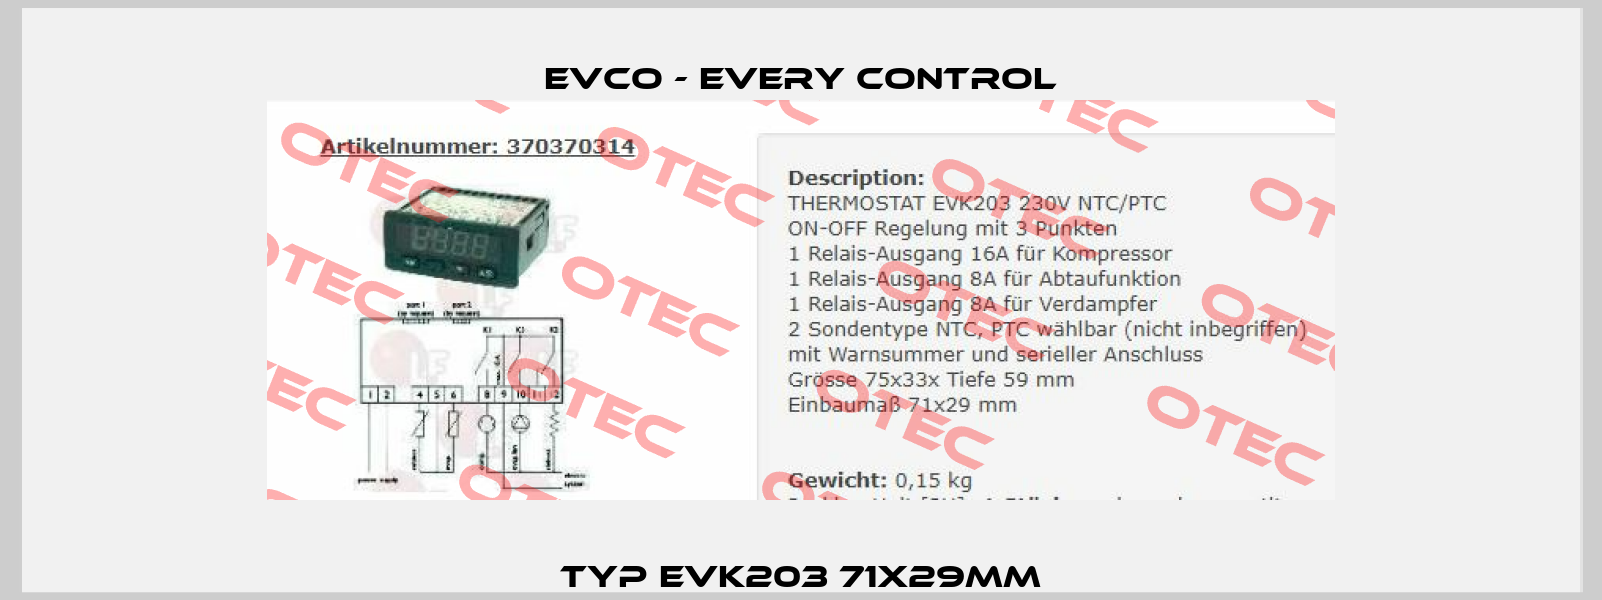 Typ EVK203 71x29mm EVCO - Every Control